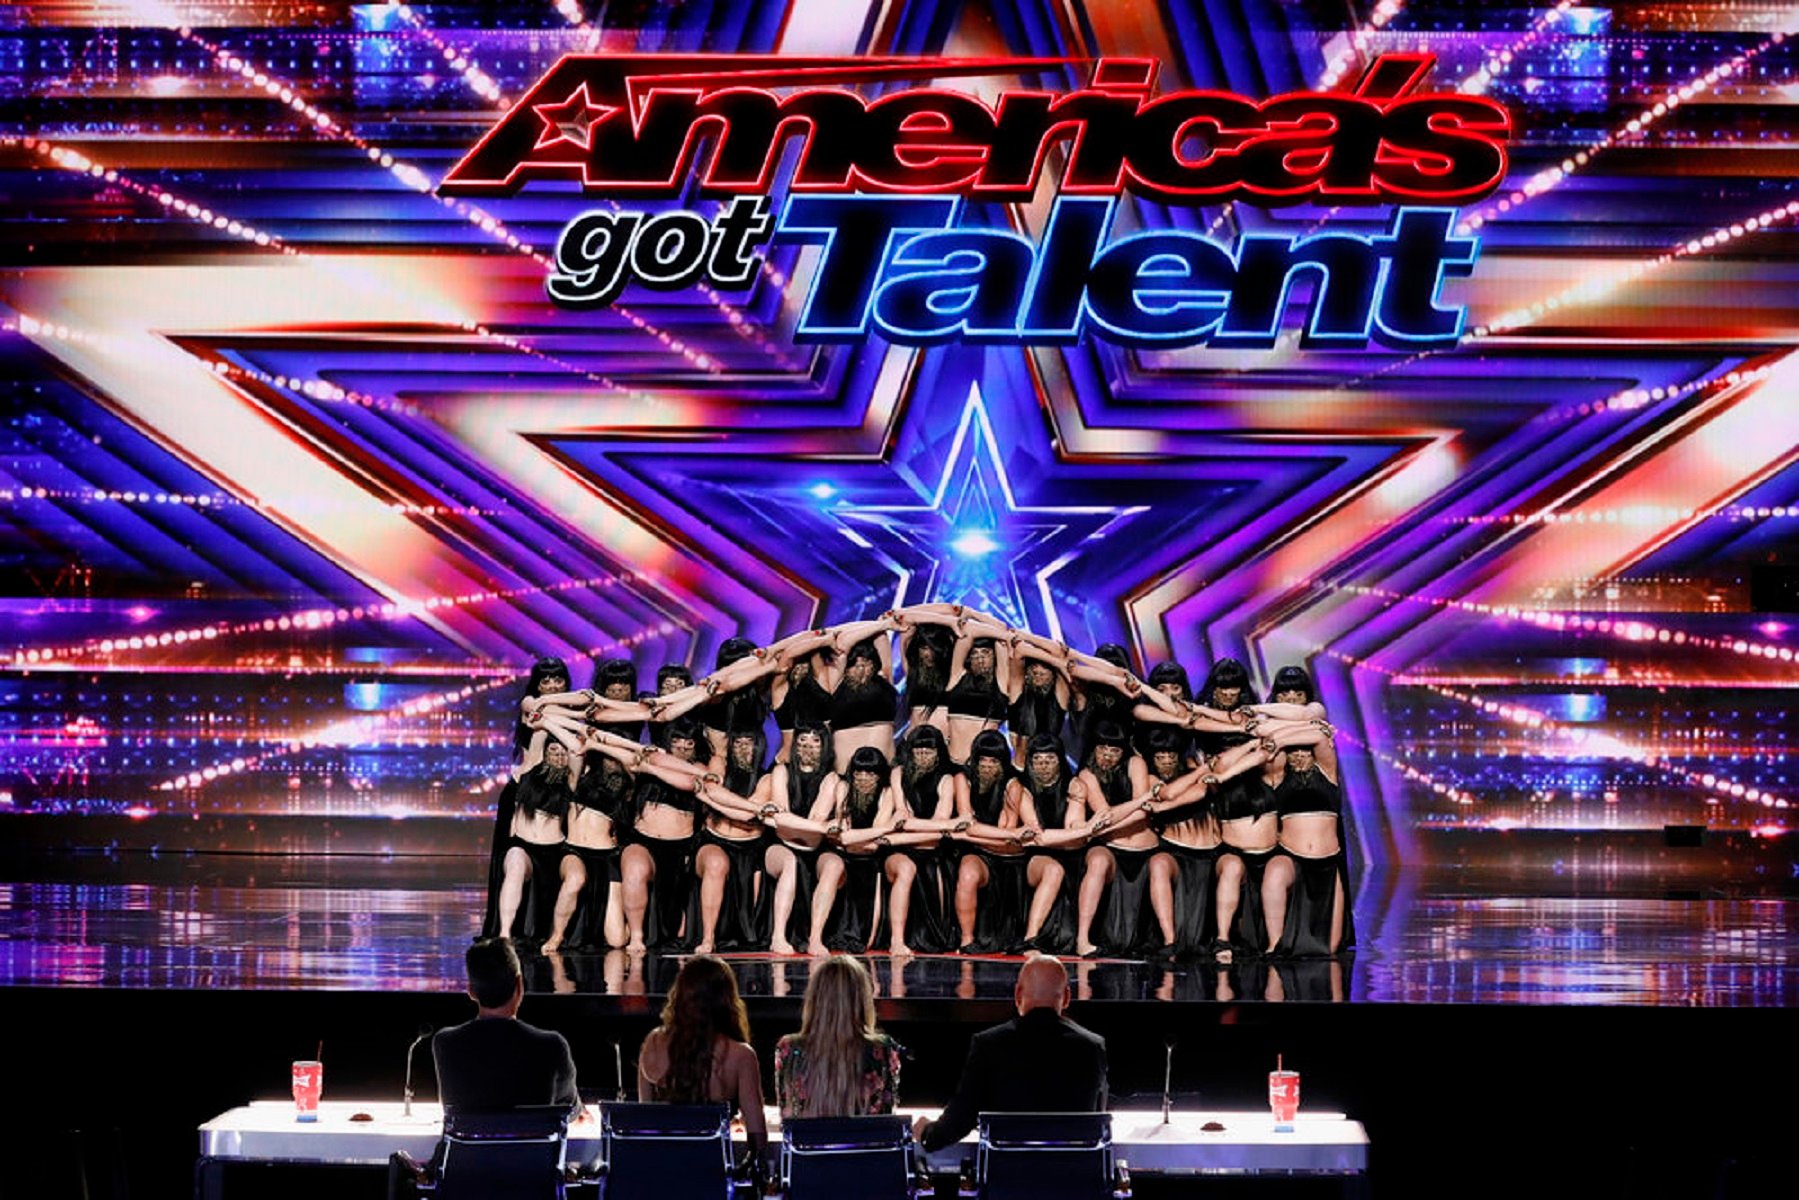 'AGT' Season 17: The Mayyas dance group peforms on stage and wins the golden buzzer from Sofia Vergara